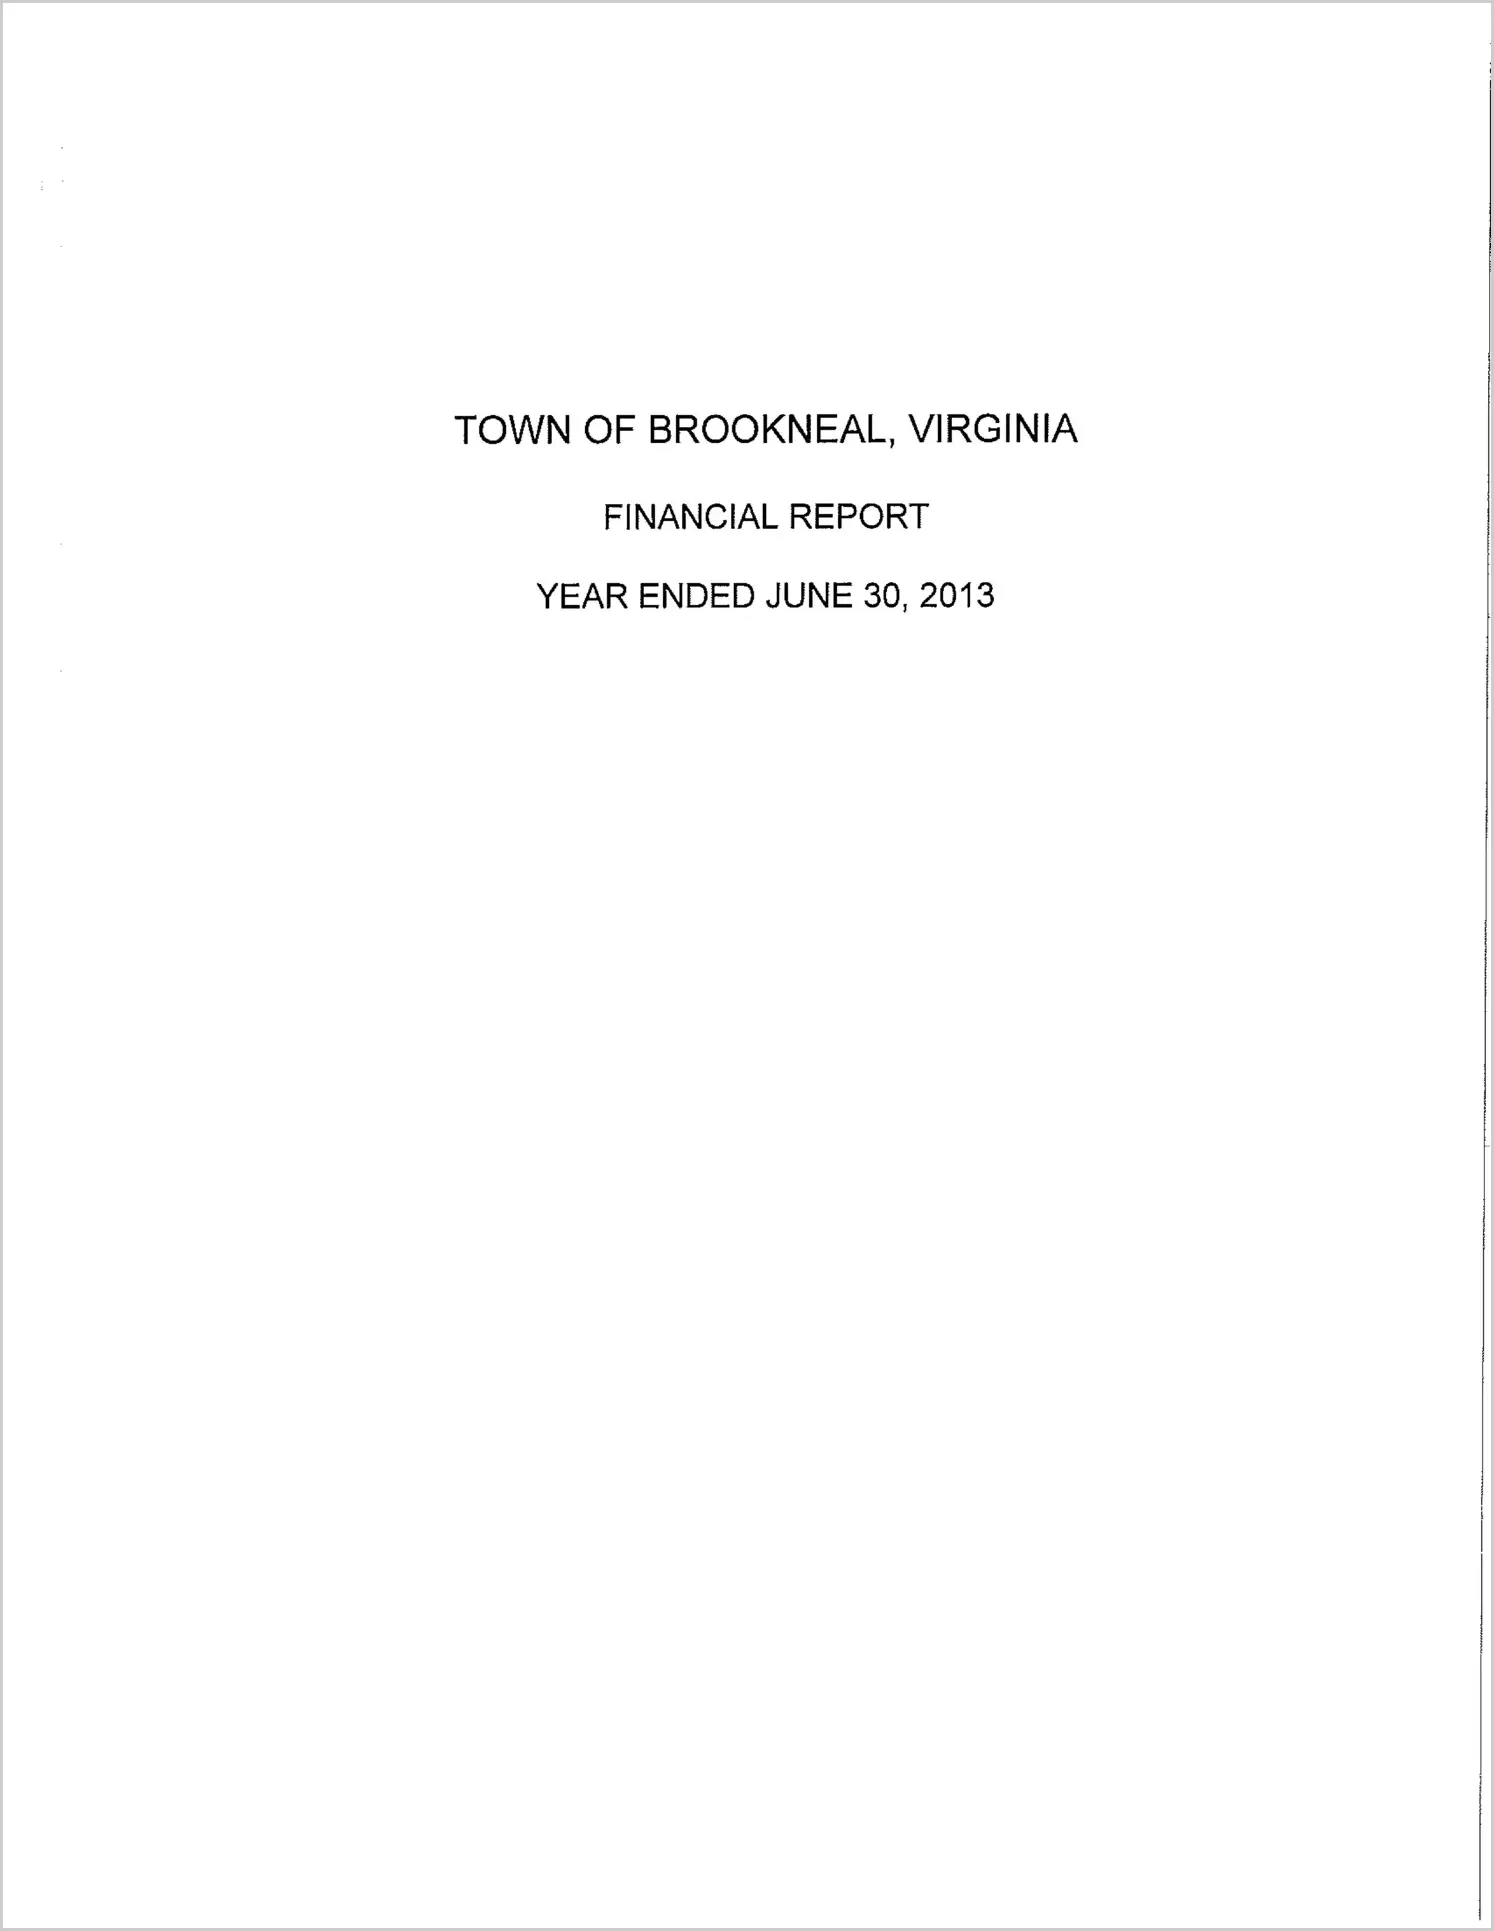 2013 Annual Financial Report for Town of Brookneal